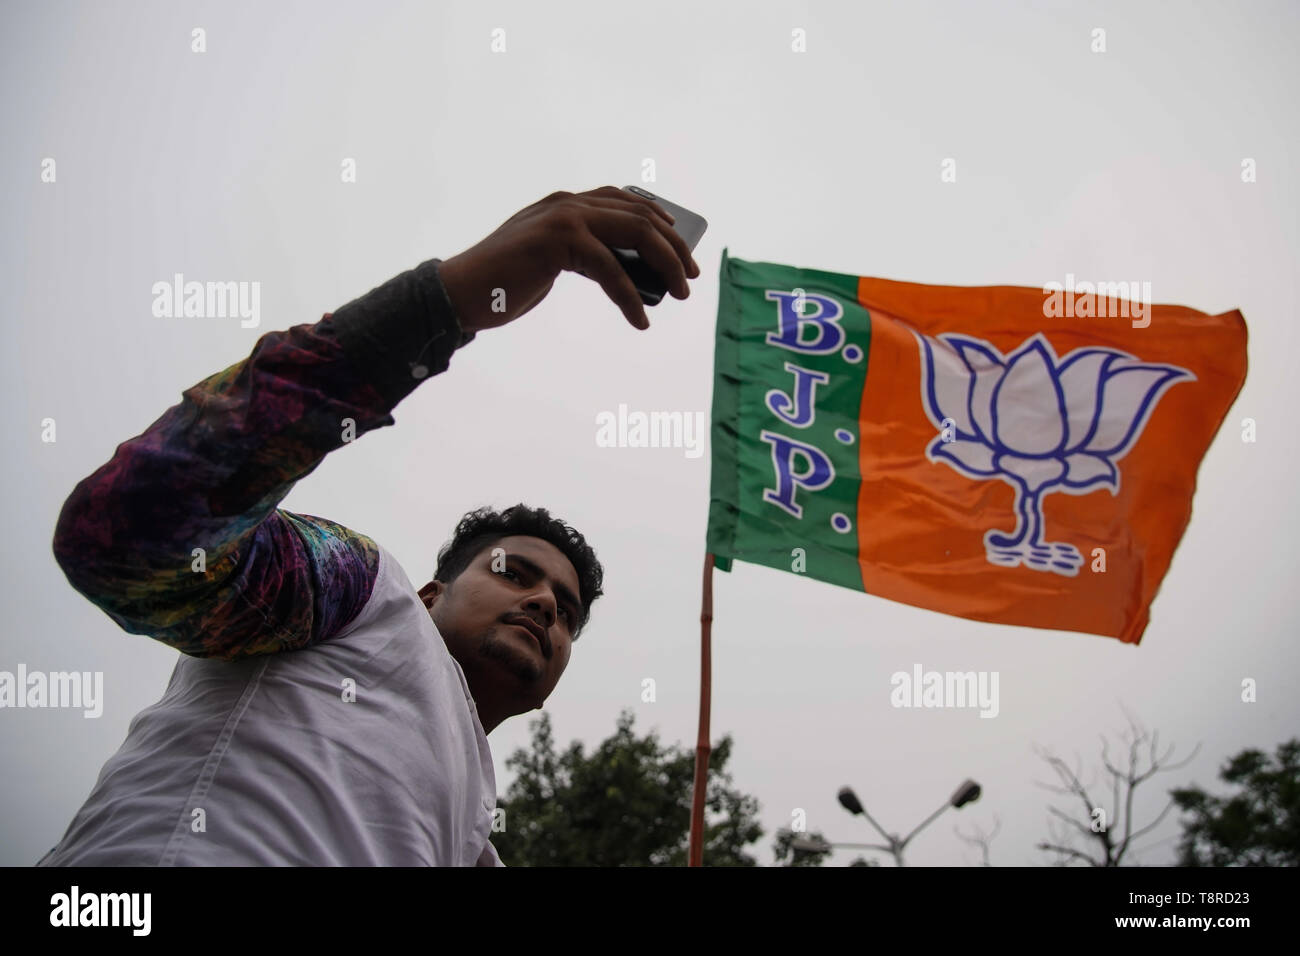 A Bharatiya Janta Party Or Bjp Supporter Seen Taking A Selfie While Holding A Flag During